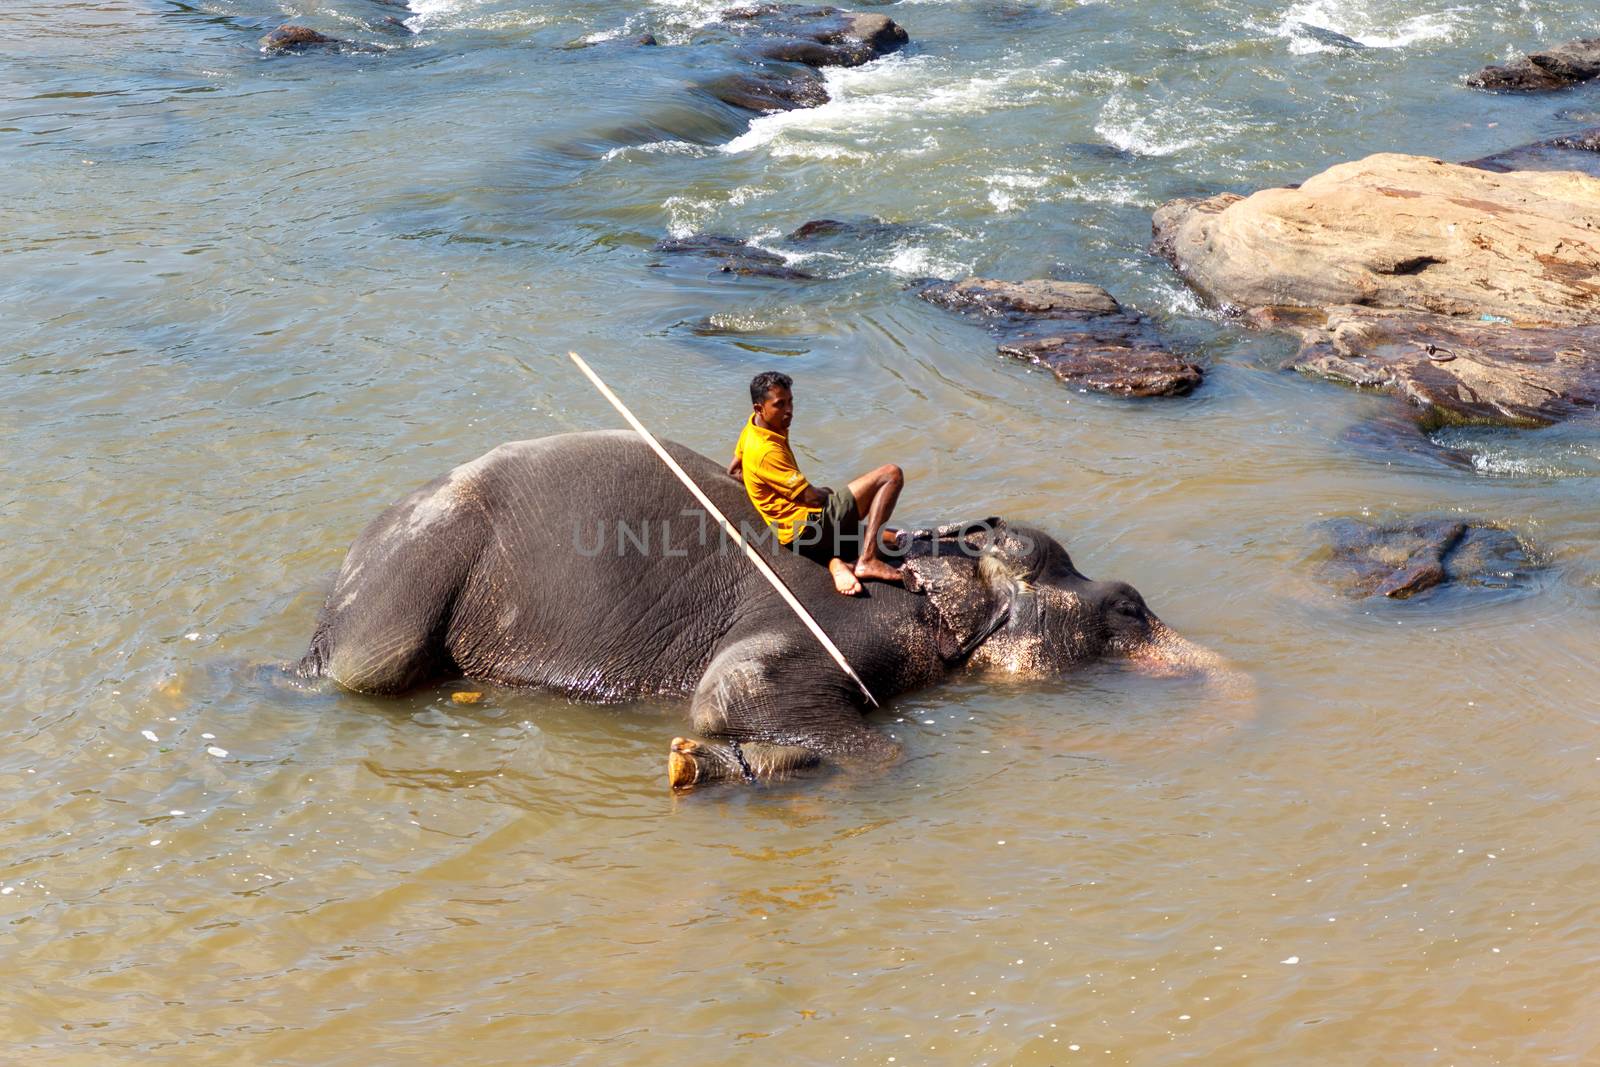 SRI LANKA - Circa 2014: Man taking a rest on an elephant that is laying on water to coll down from the extreme heat wave.